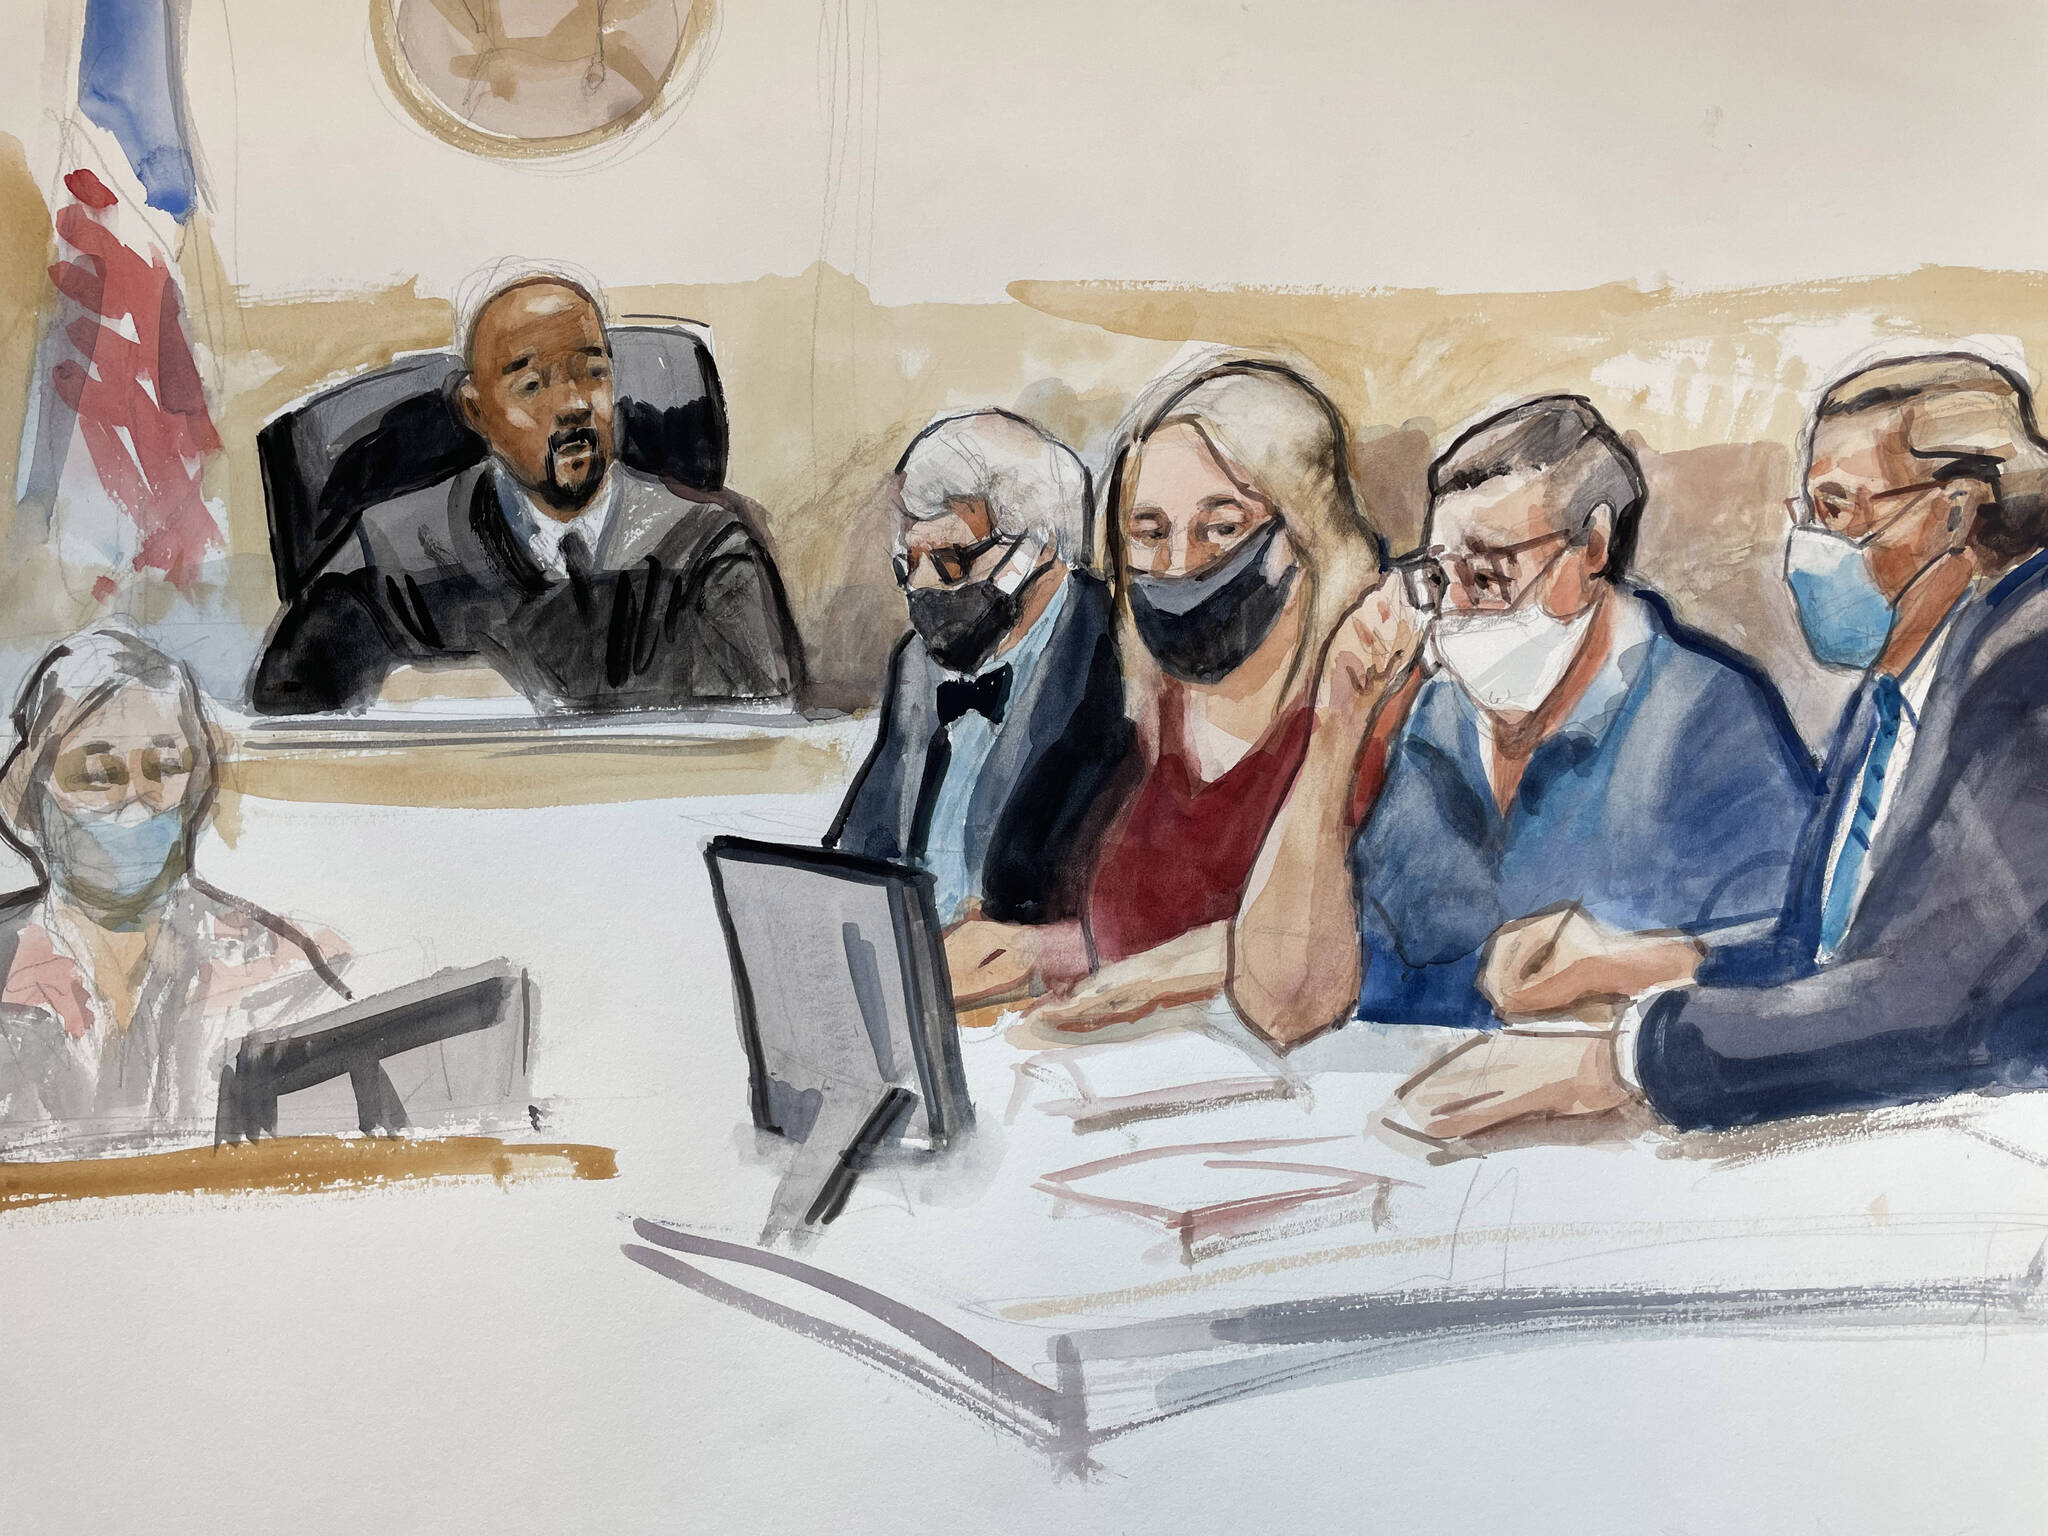 Joann and Allan Thomas are flanked in court by their attorneys Terrence Kellogg (fourth from the right) and John Henry Browne (far right) on May 10, 2022. Judge Richard Jones is presiding over the case. Sketch by Seattle-based artist Lois Silver